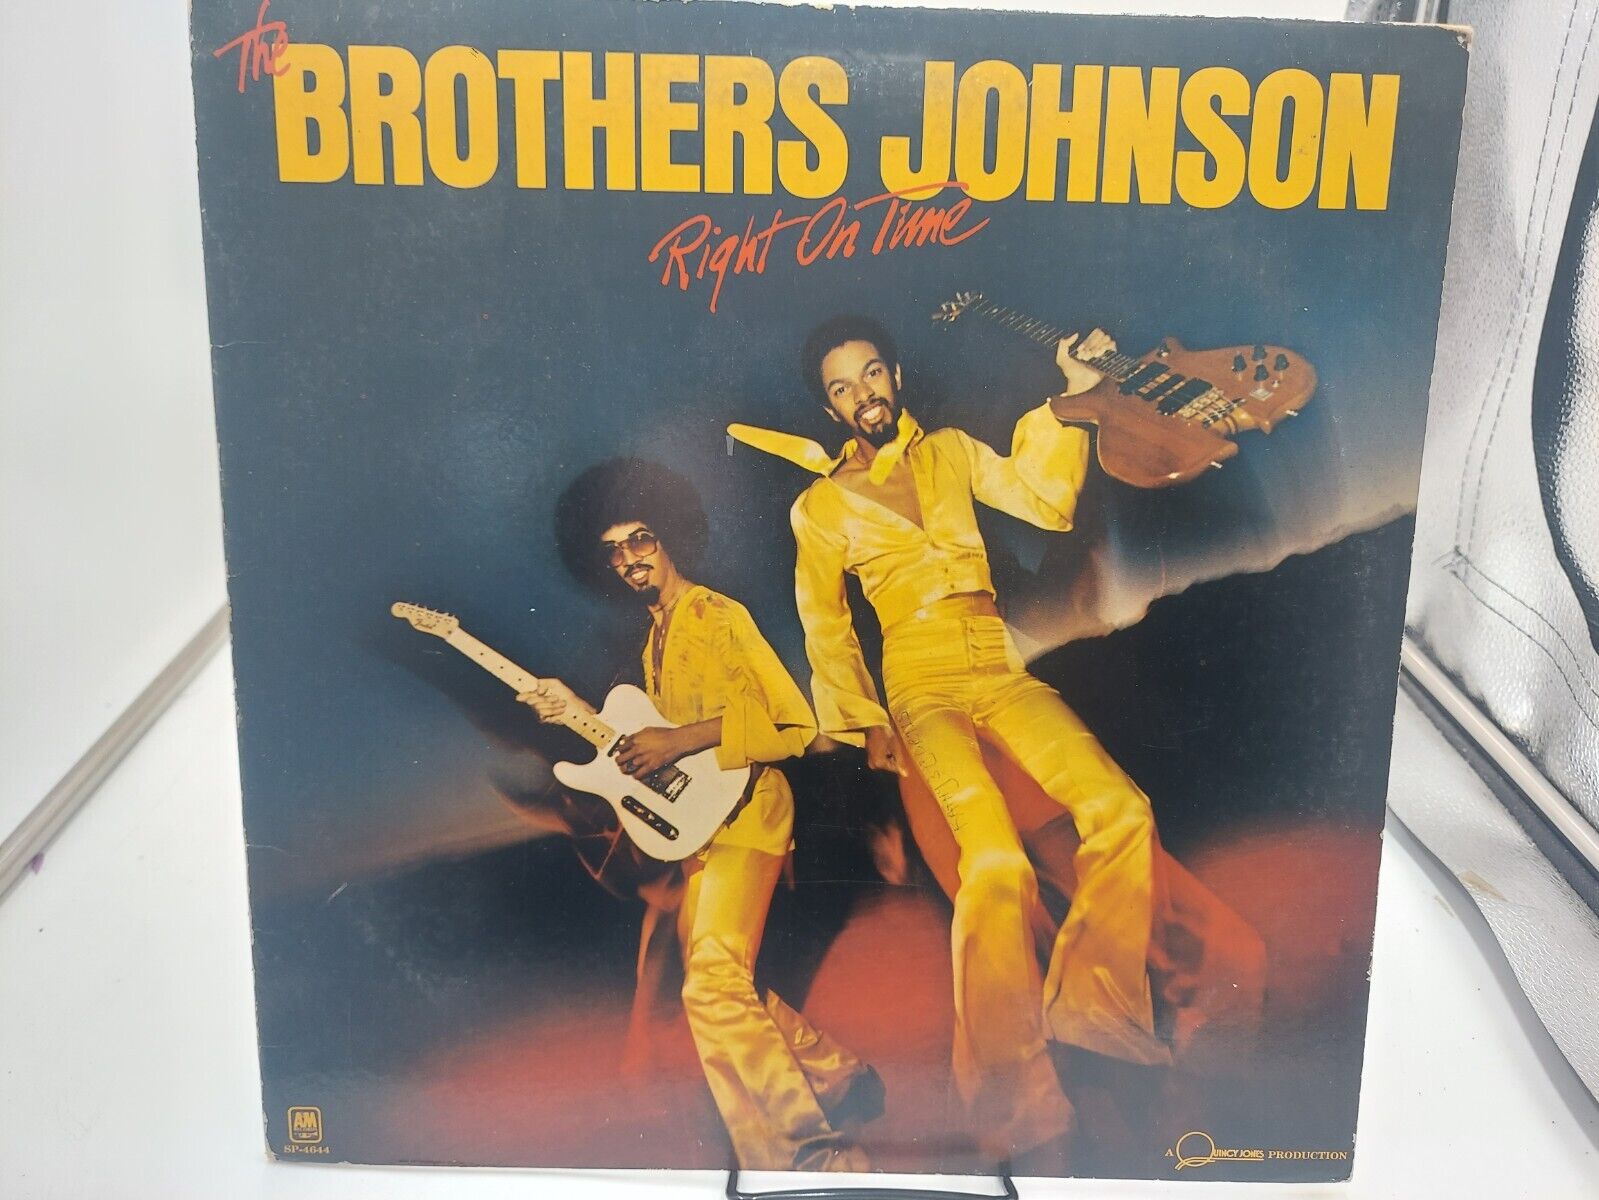 THE BROTHERS JOHNSON Right On Time LP Record 1977 Insert Ultrasonic Clean VG+